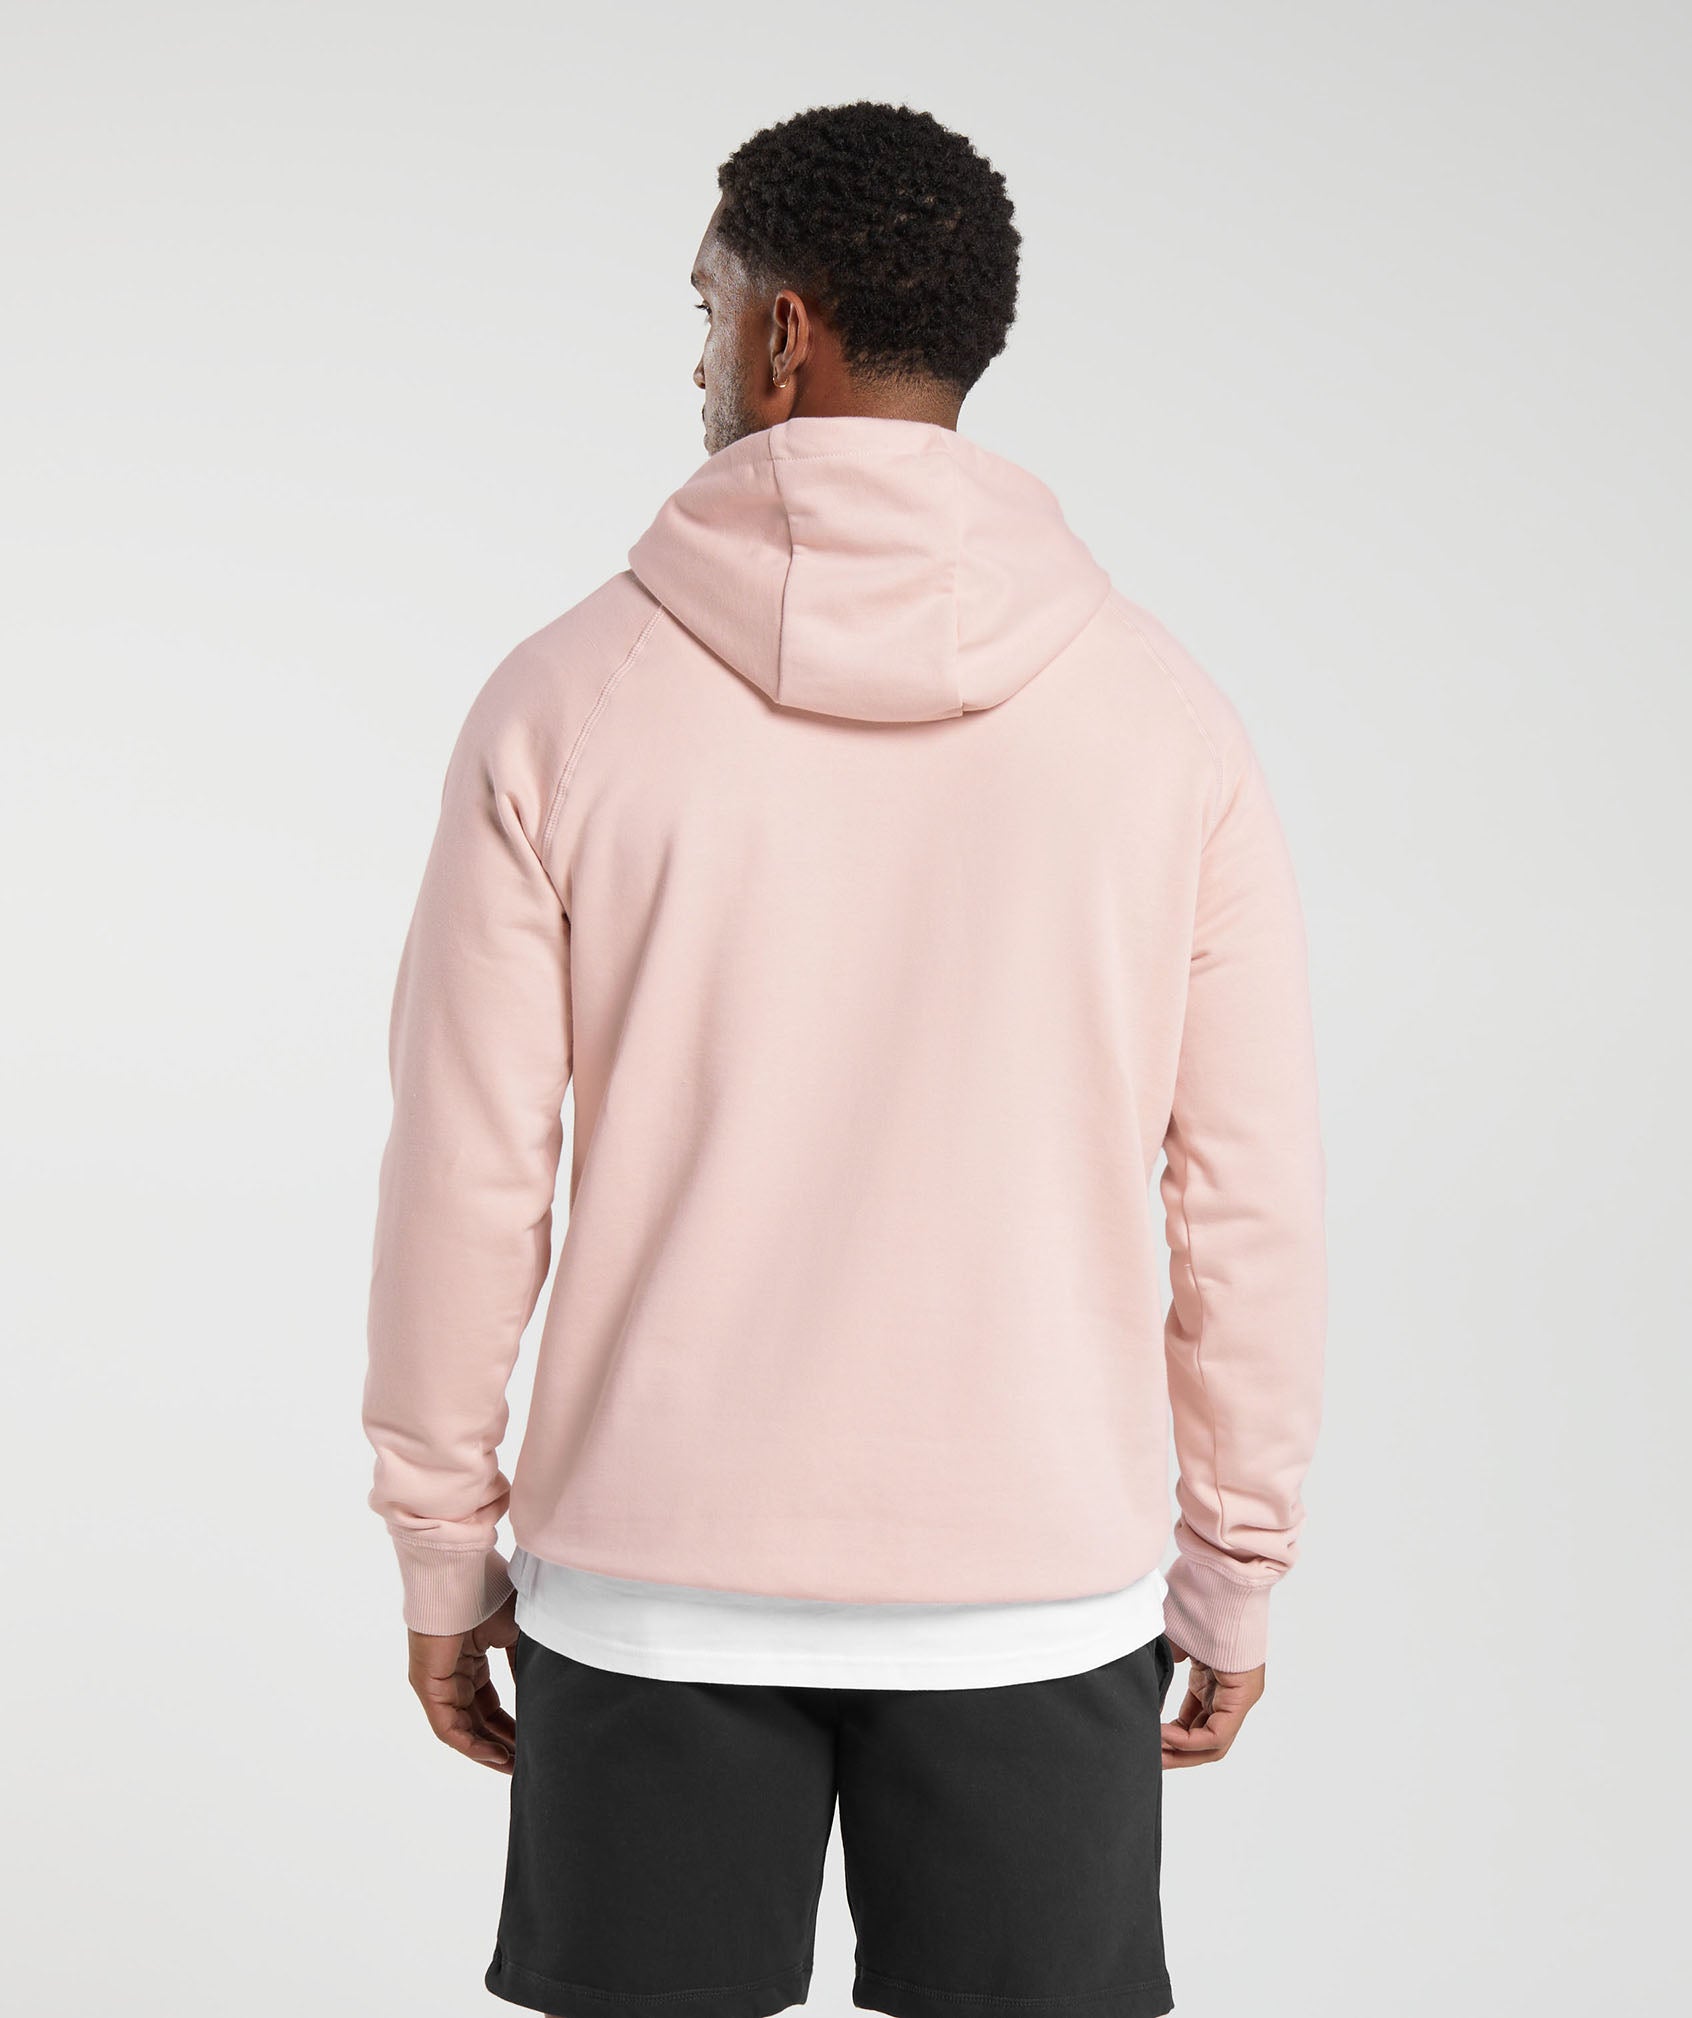 Crest Hoodie in Misty Pink - view 2